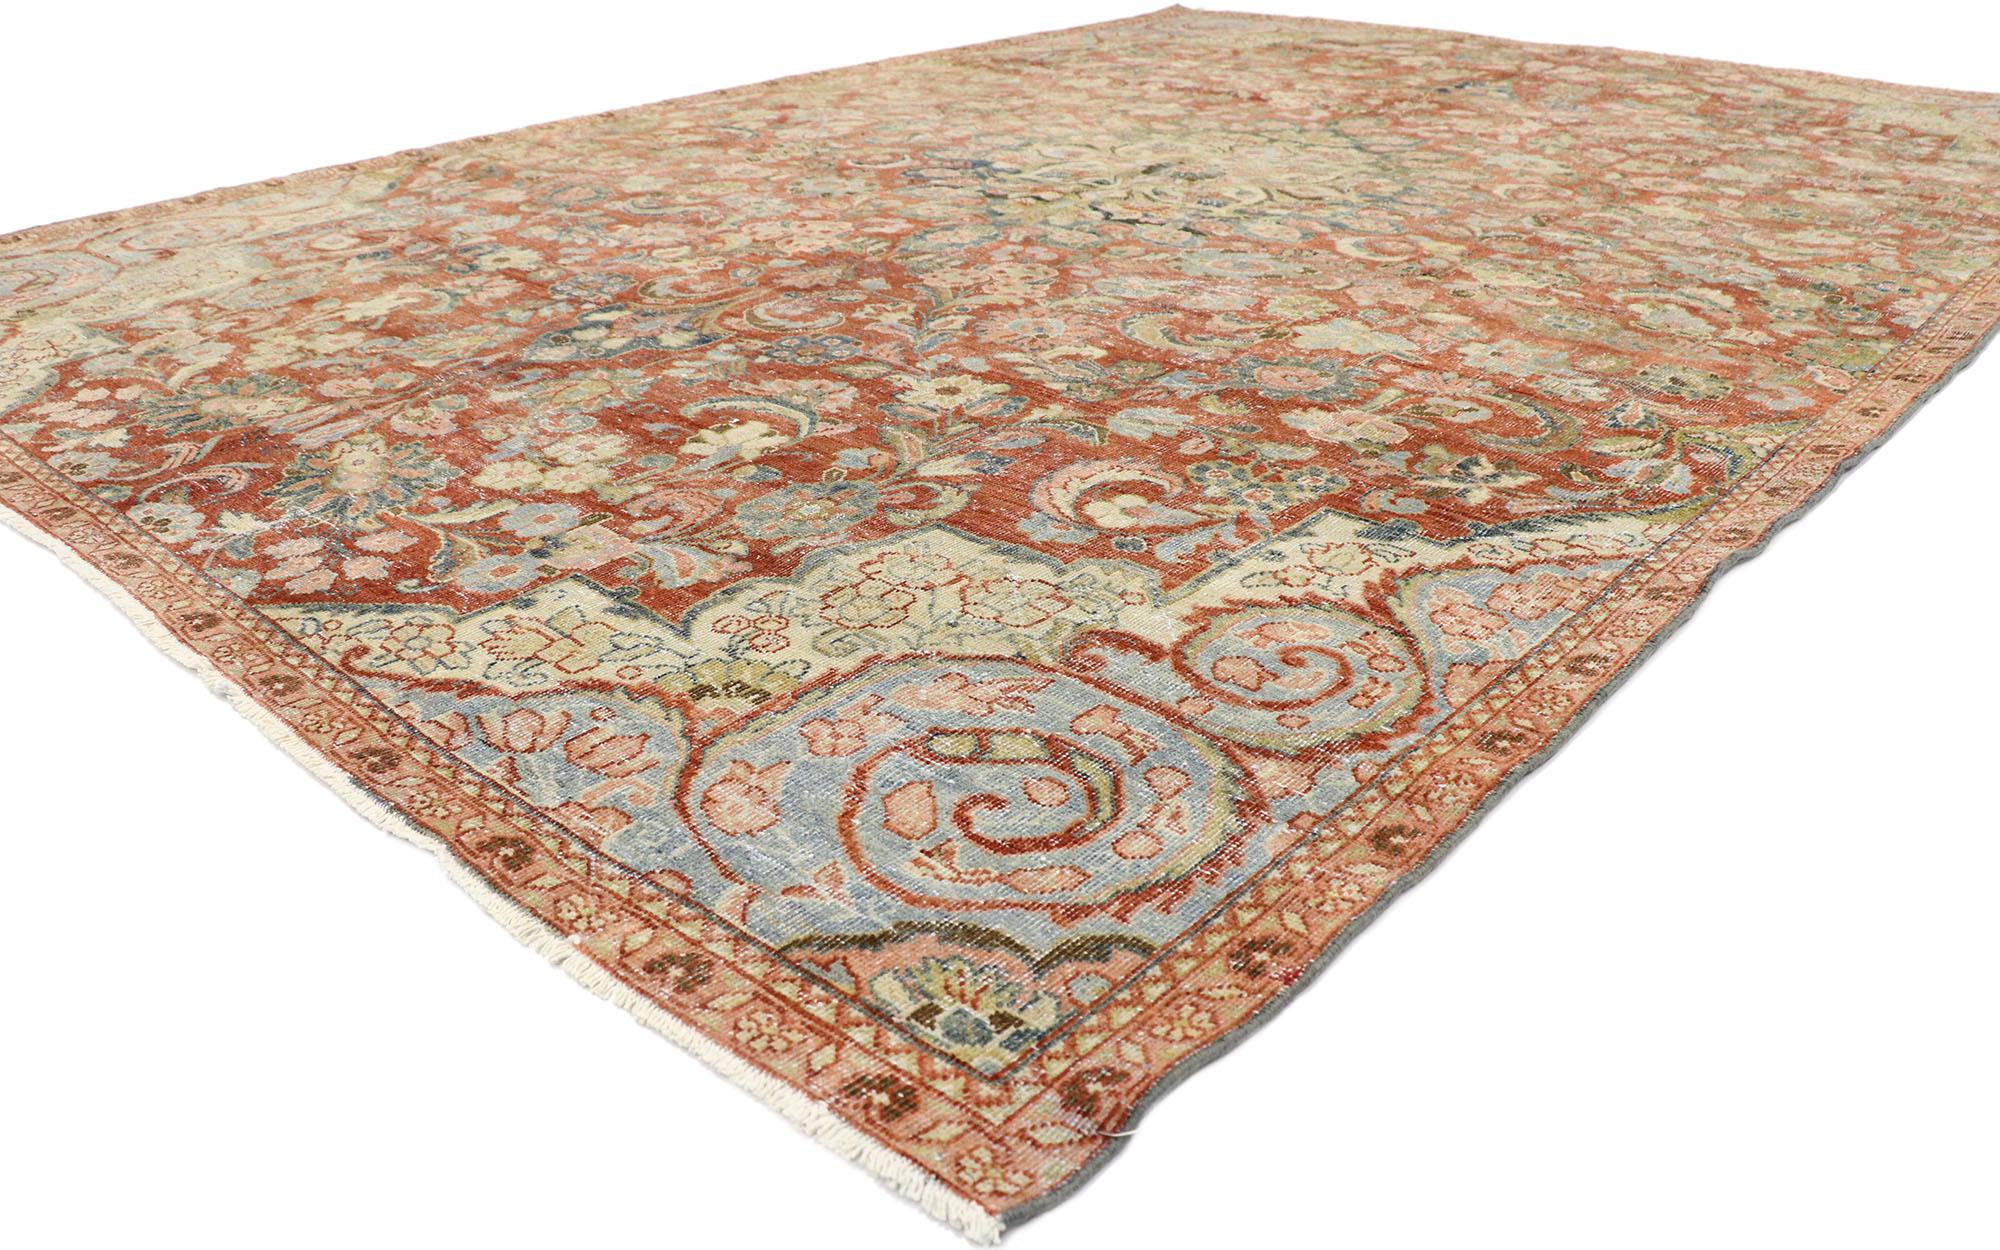 60951 distressed antique Persian Mahal rug with Rustic style 08'01 x 11'05, Traditional style and rustic sensibility with romantic connotations, this hand-knotted wool distressed antique Persian Mahal rug is a vision of woven beauty. The lovingly